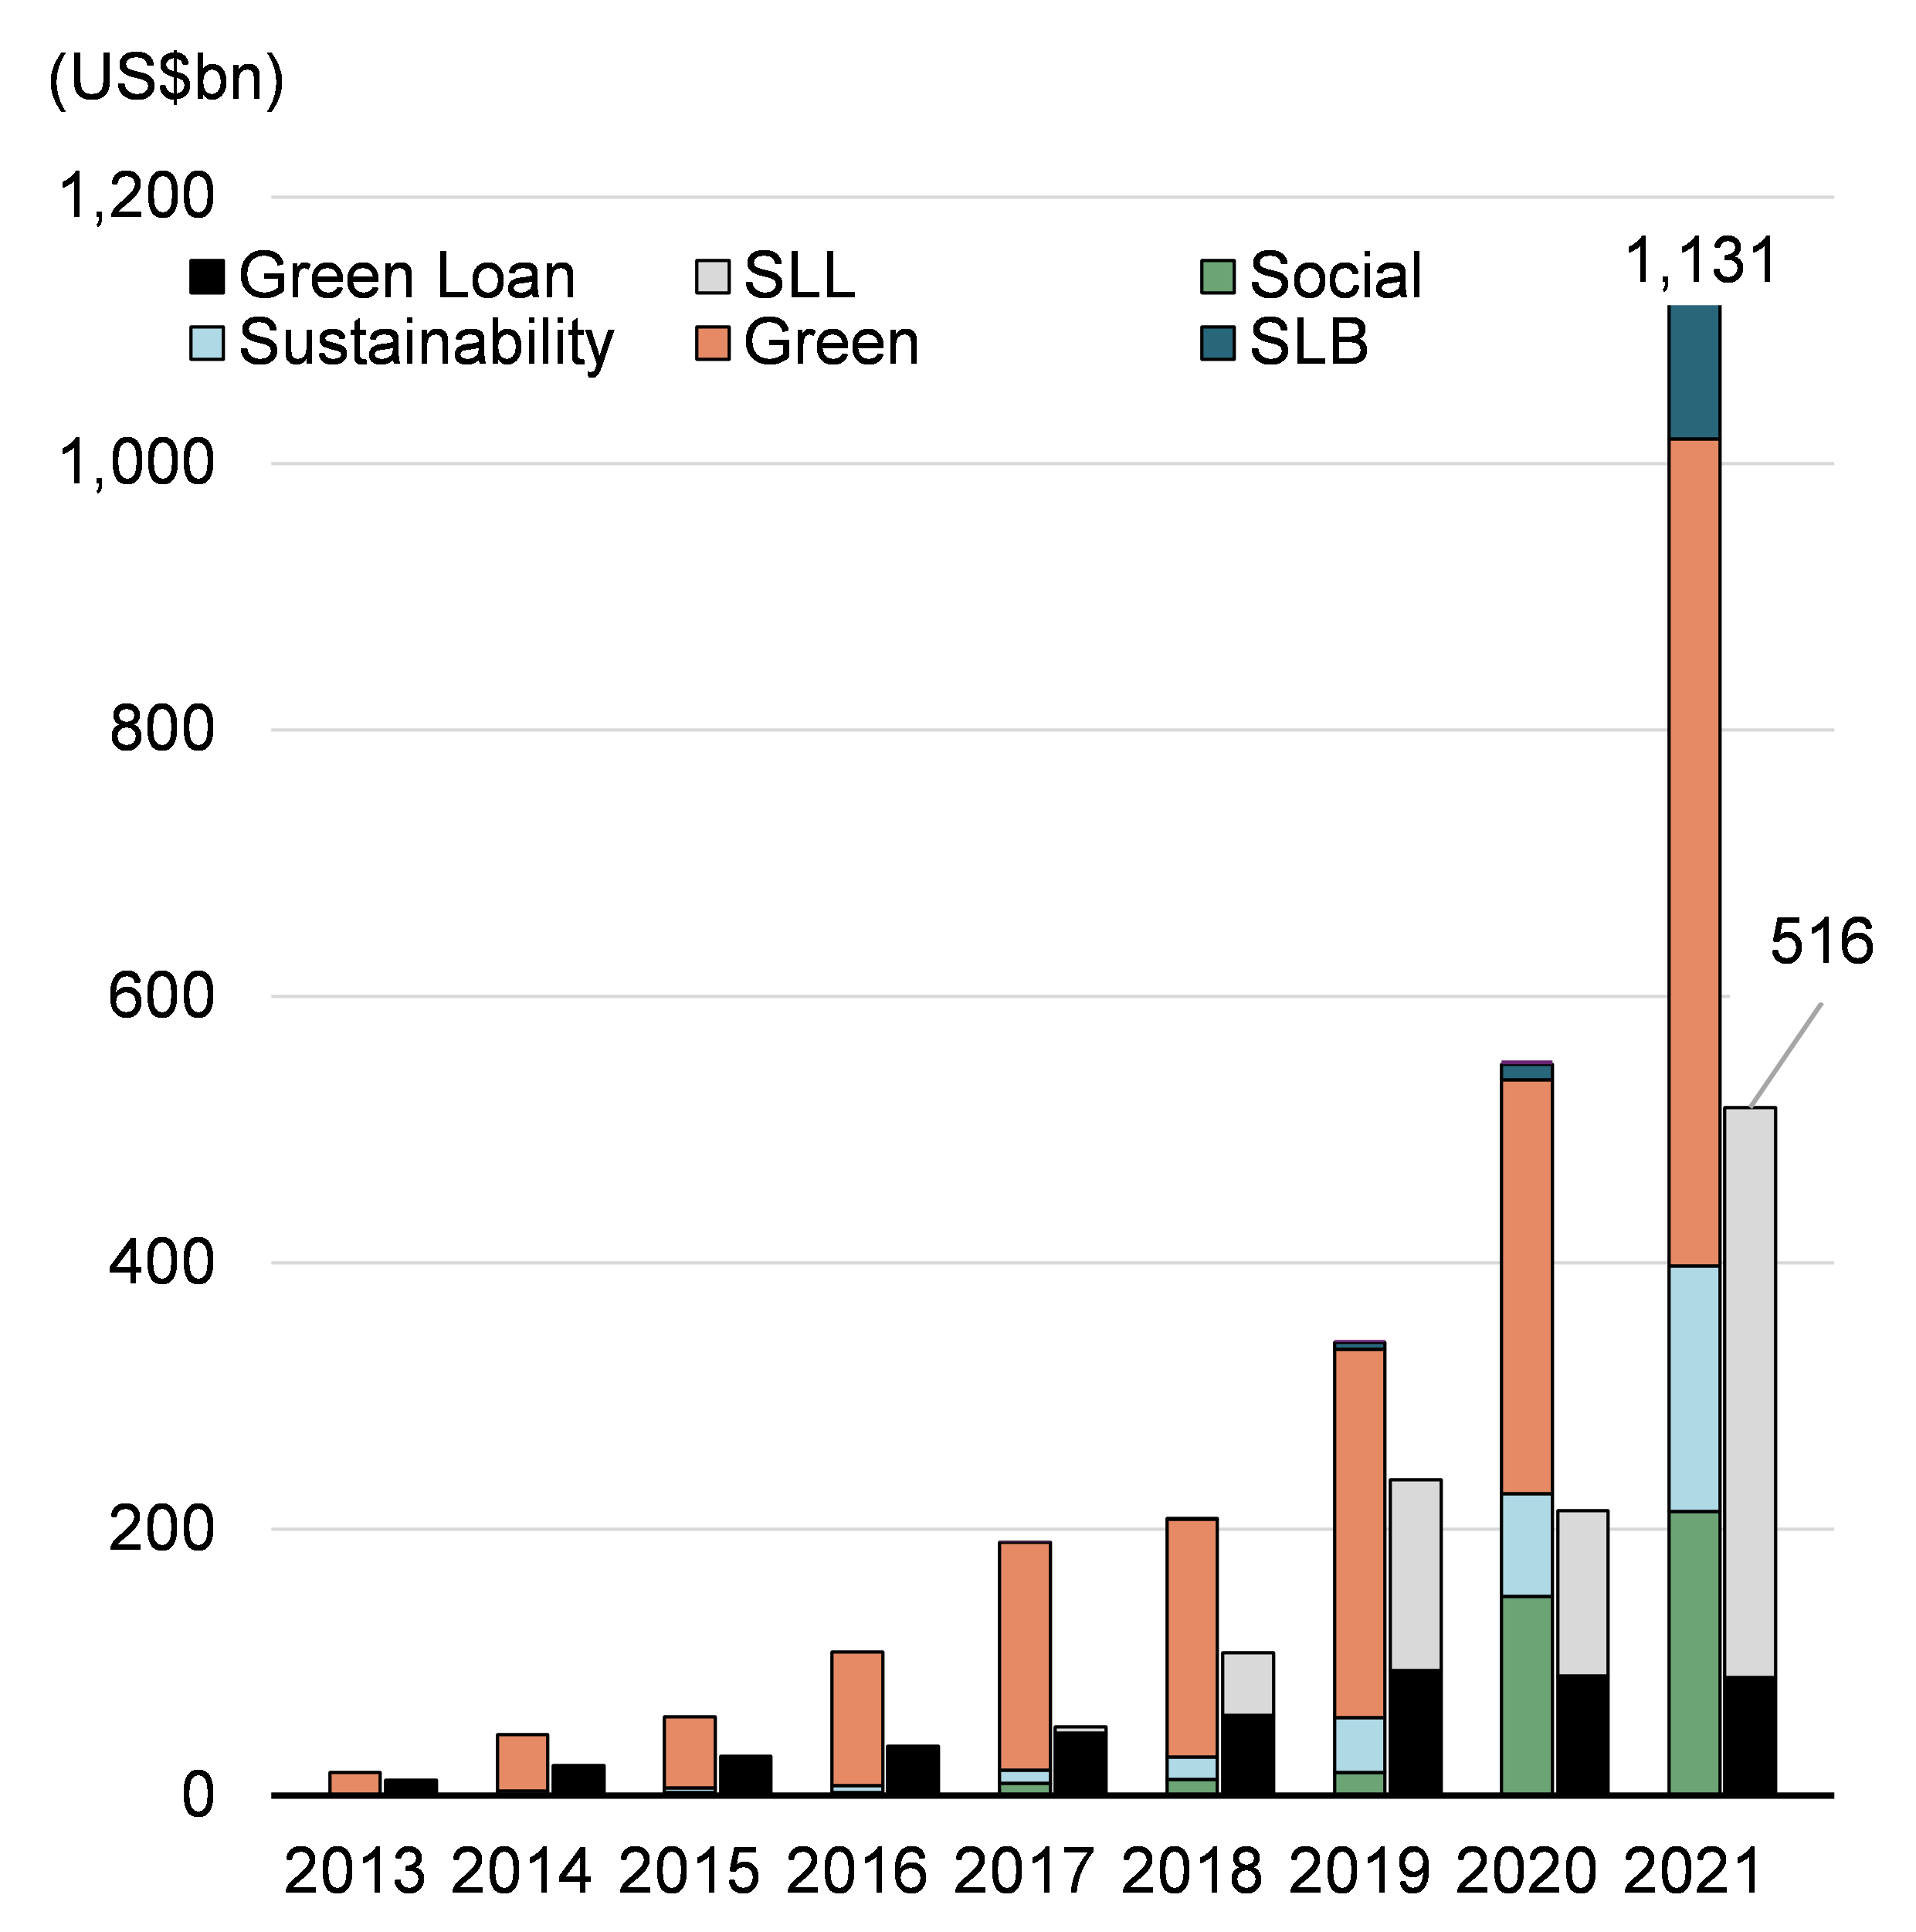 Figure A2: Annual sustainable bond and loan issuance, by category (US$bn)